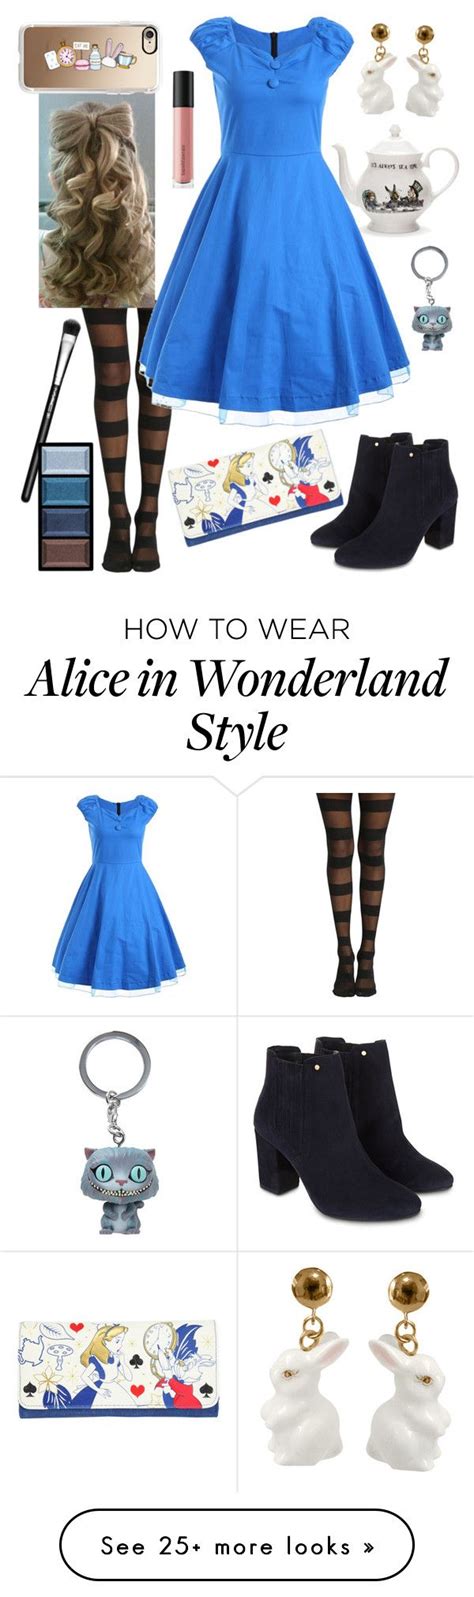 Alice Alice In Wonderland By Caroline Huxsol On Polyvore Featuring